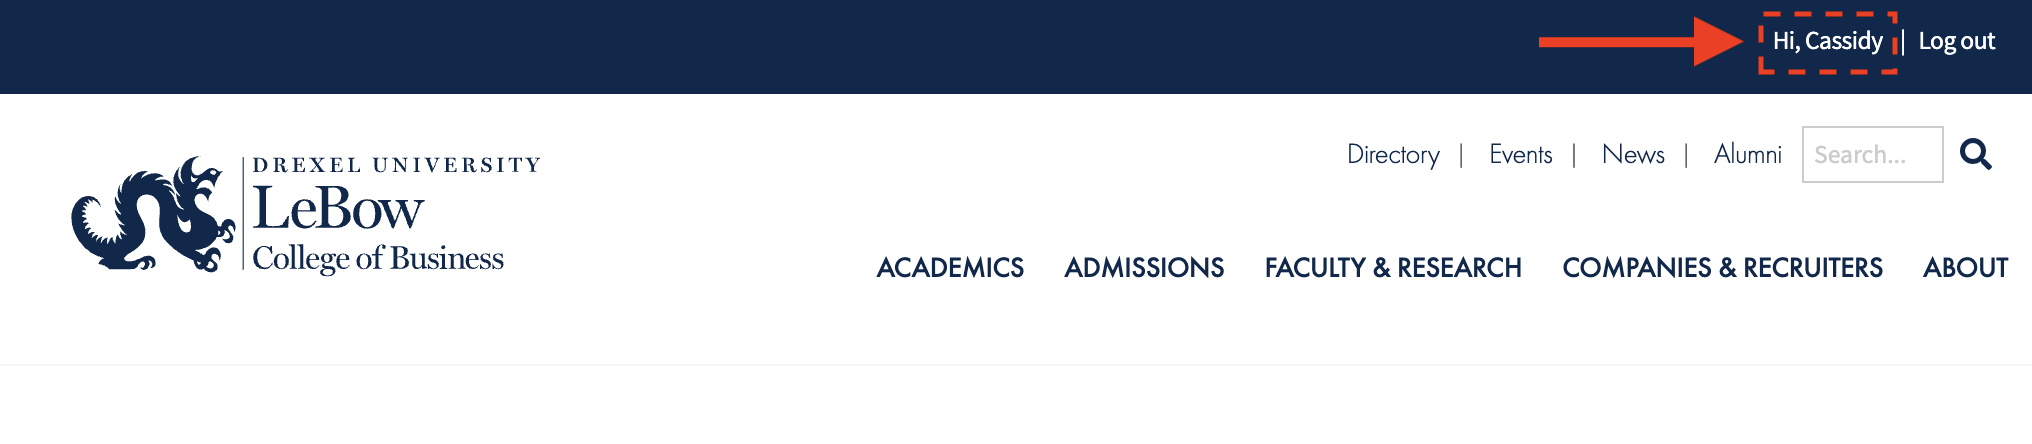 logged in area highlighted on LeBow website